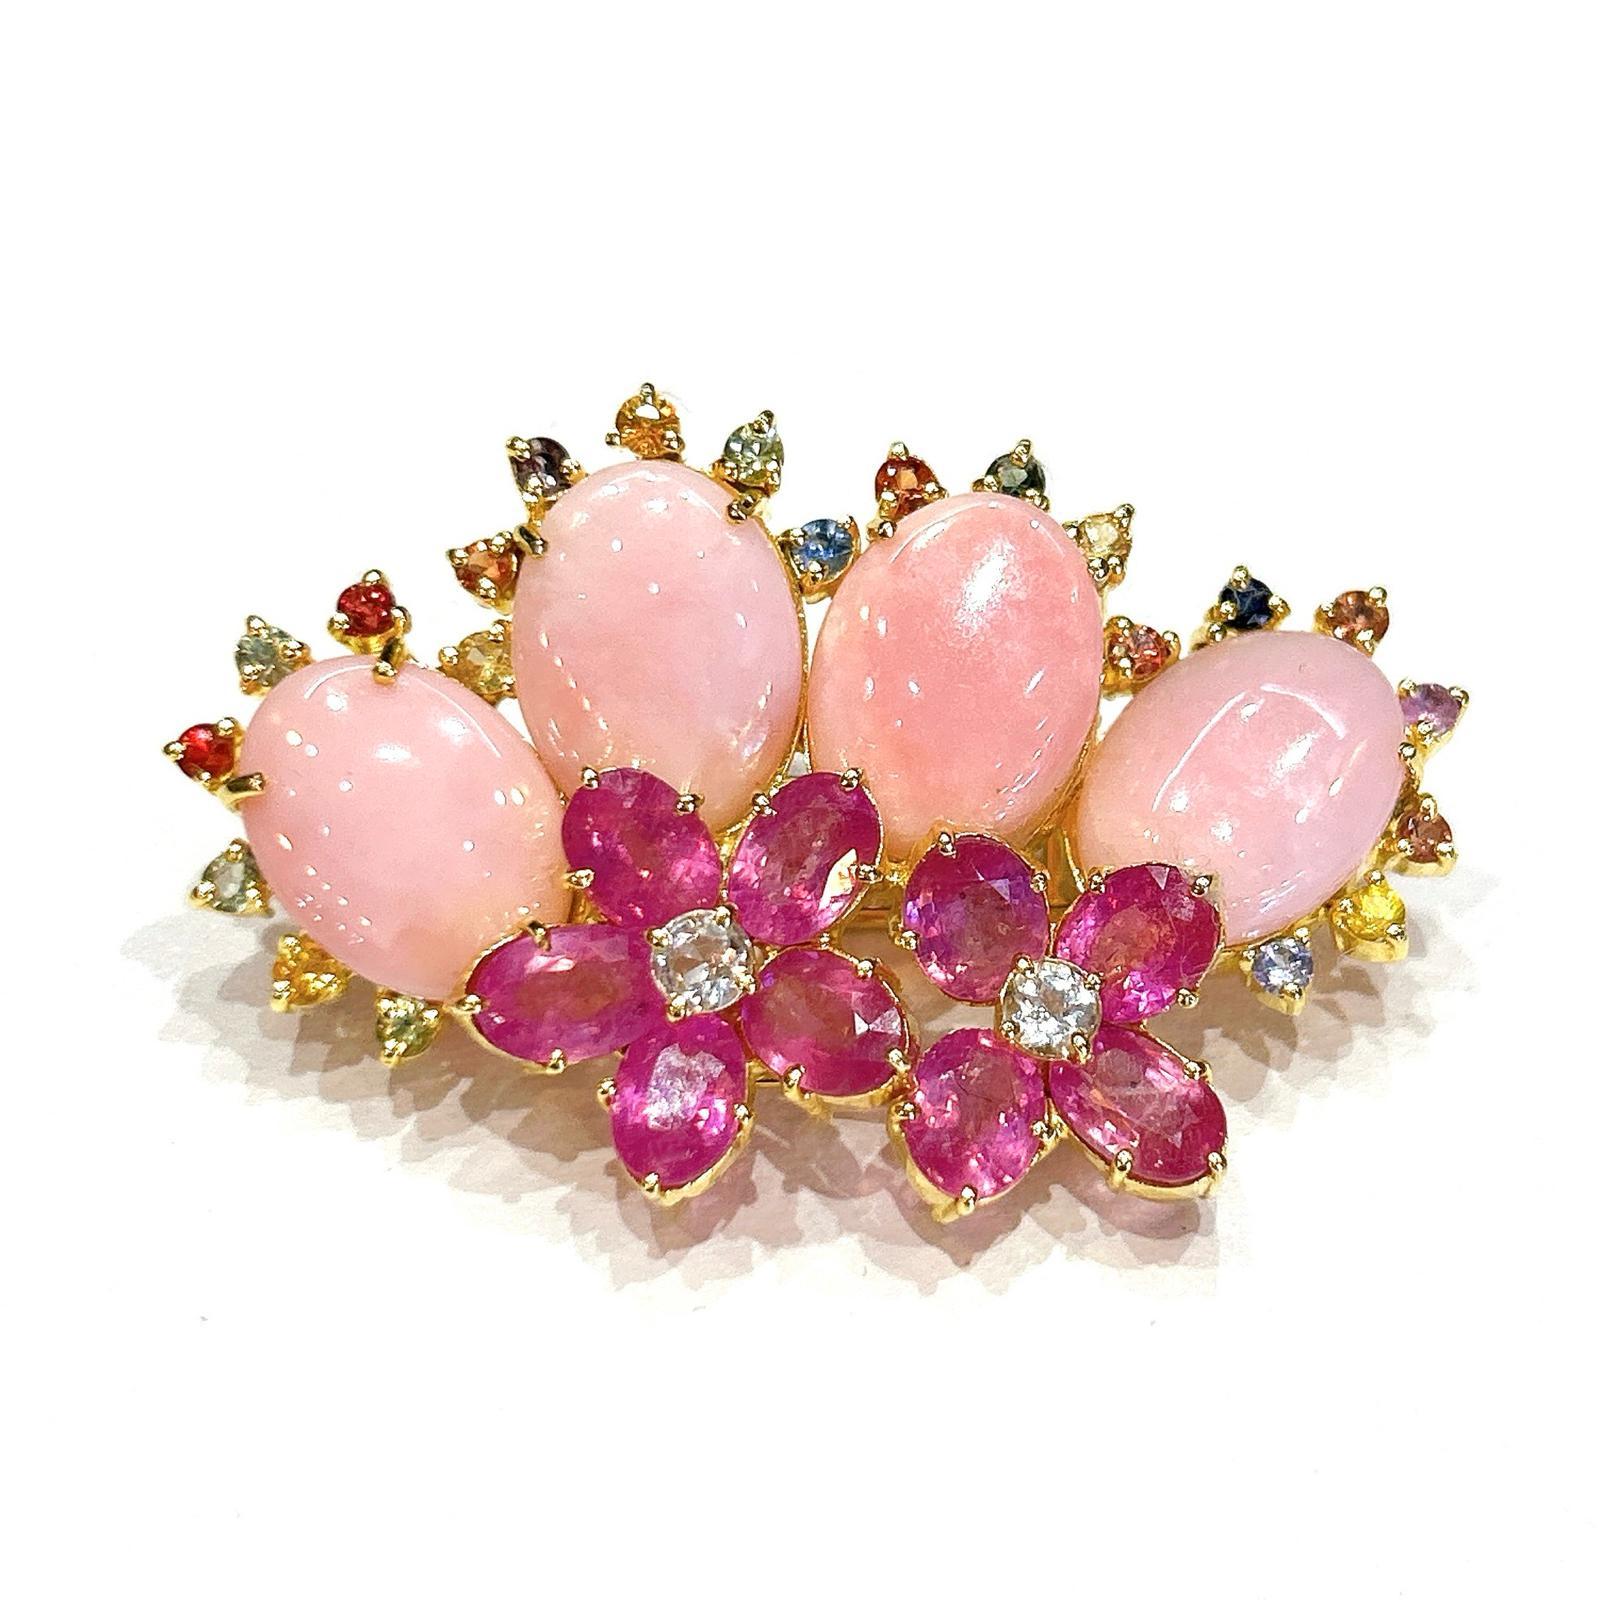 Bochic “Orient” Coral, Multi Sapphires & Ruby Brooch Set In 18K Gold & Silver 

Natural Red Ruby, Oval shape - 6 carat 
Multi color Natural Sapphires from Sri Lanka 
1 carat
Salmon Pink Coral 

The Brooch is from the 